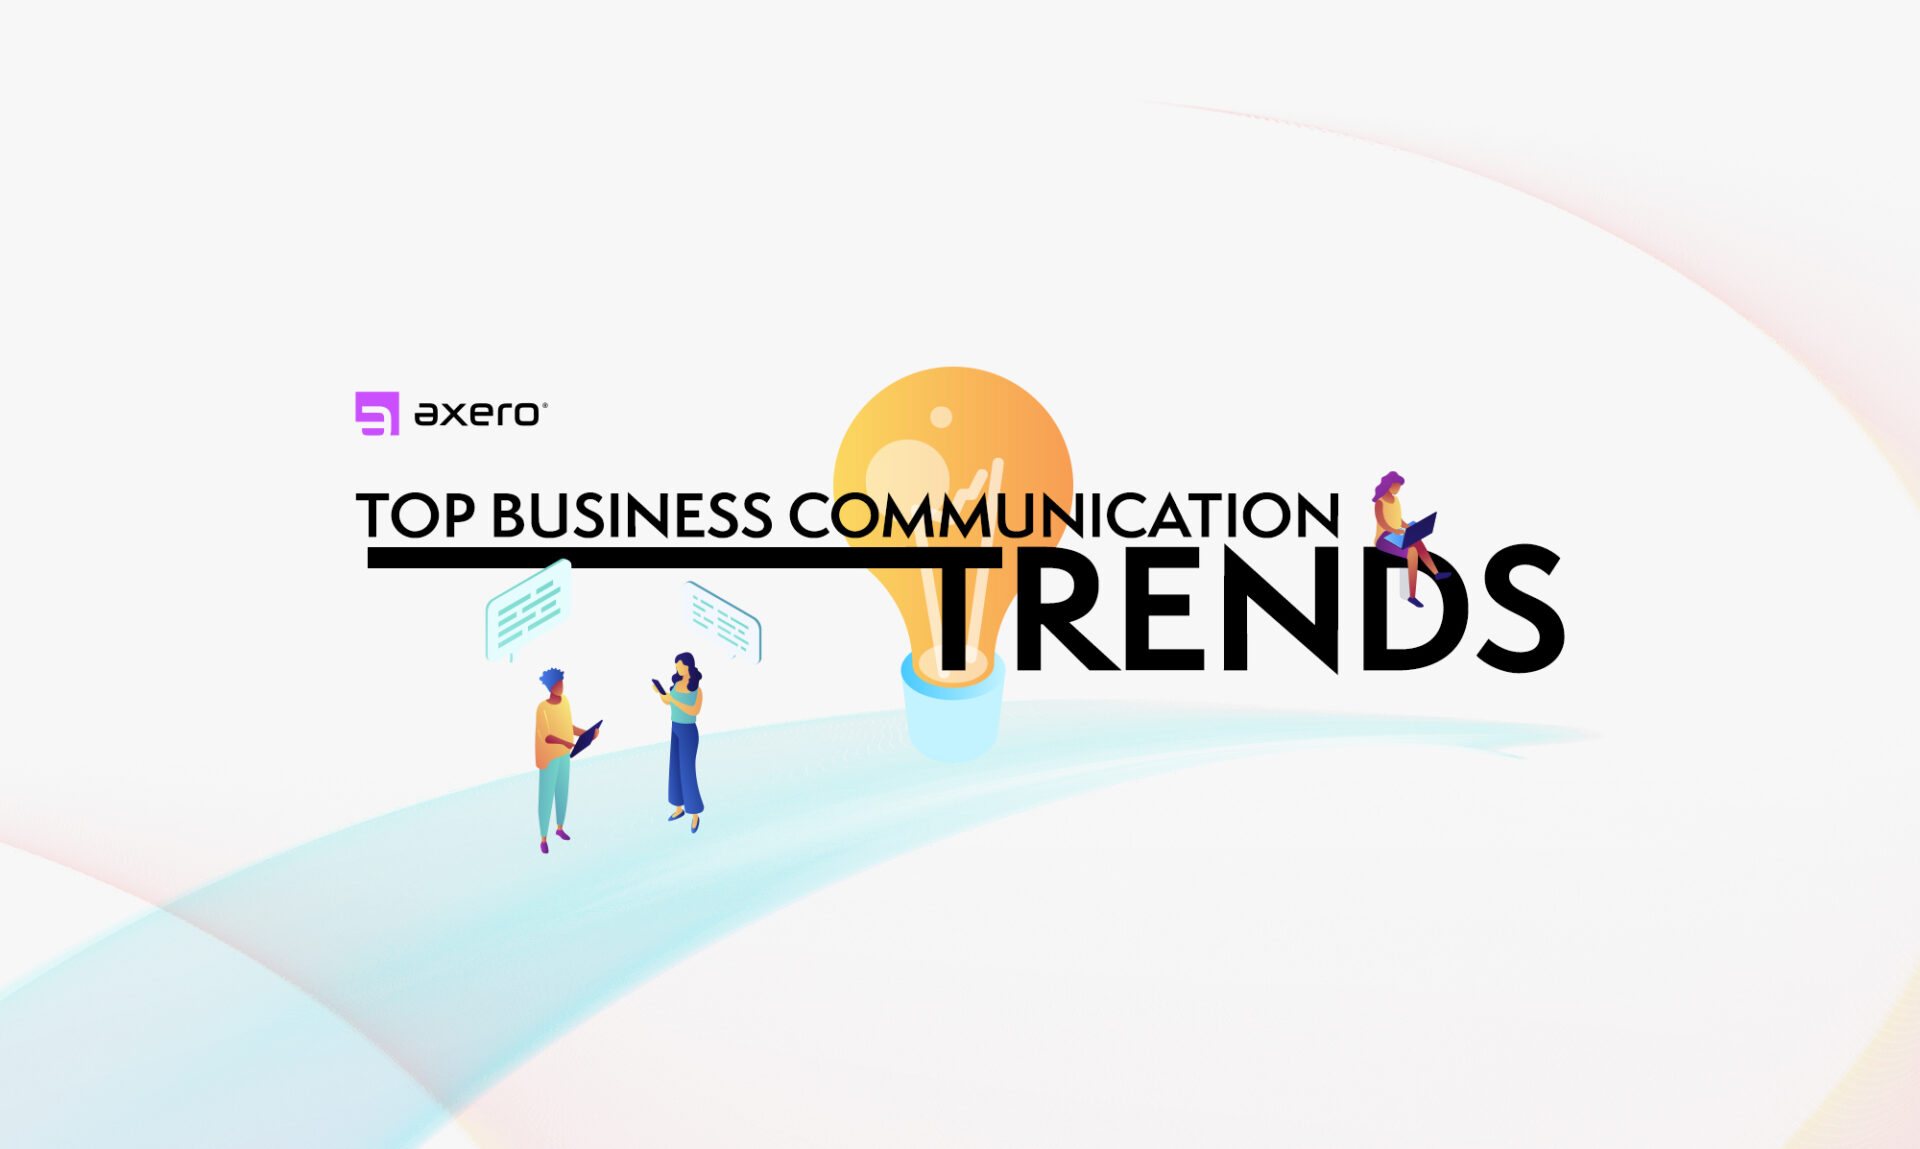 Top 10 Business Communication Trends – Improve Communication in the Workplace